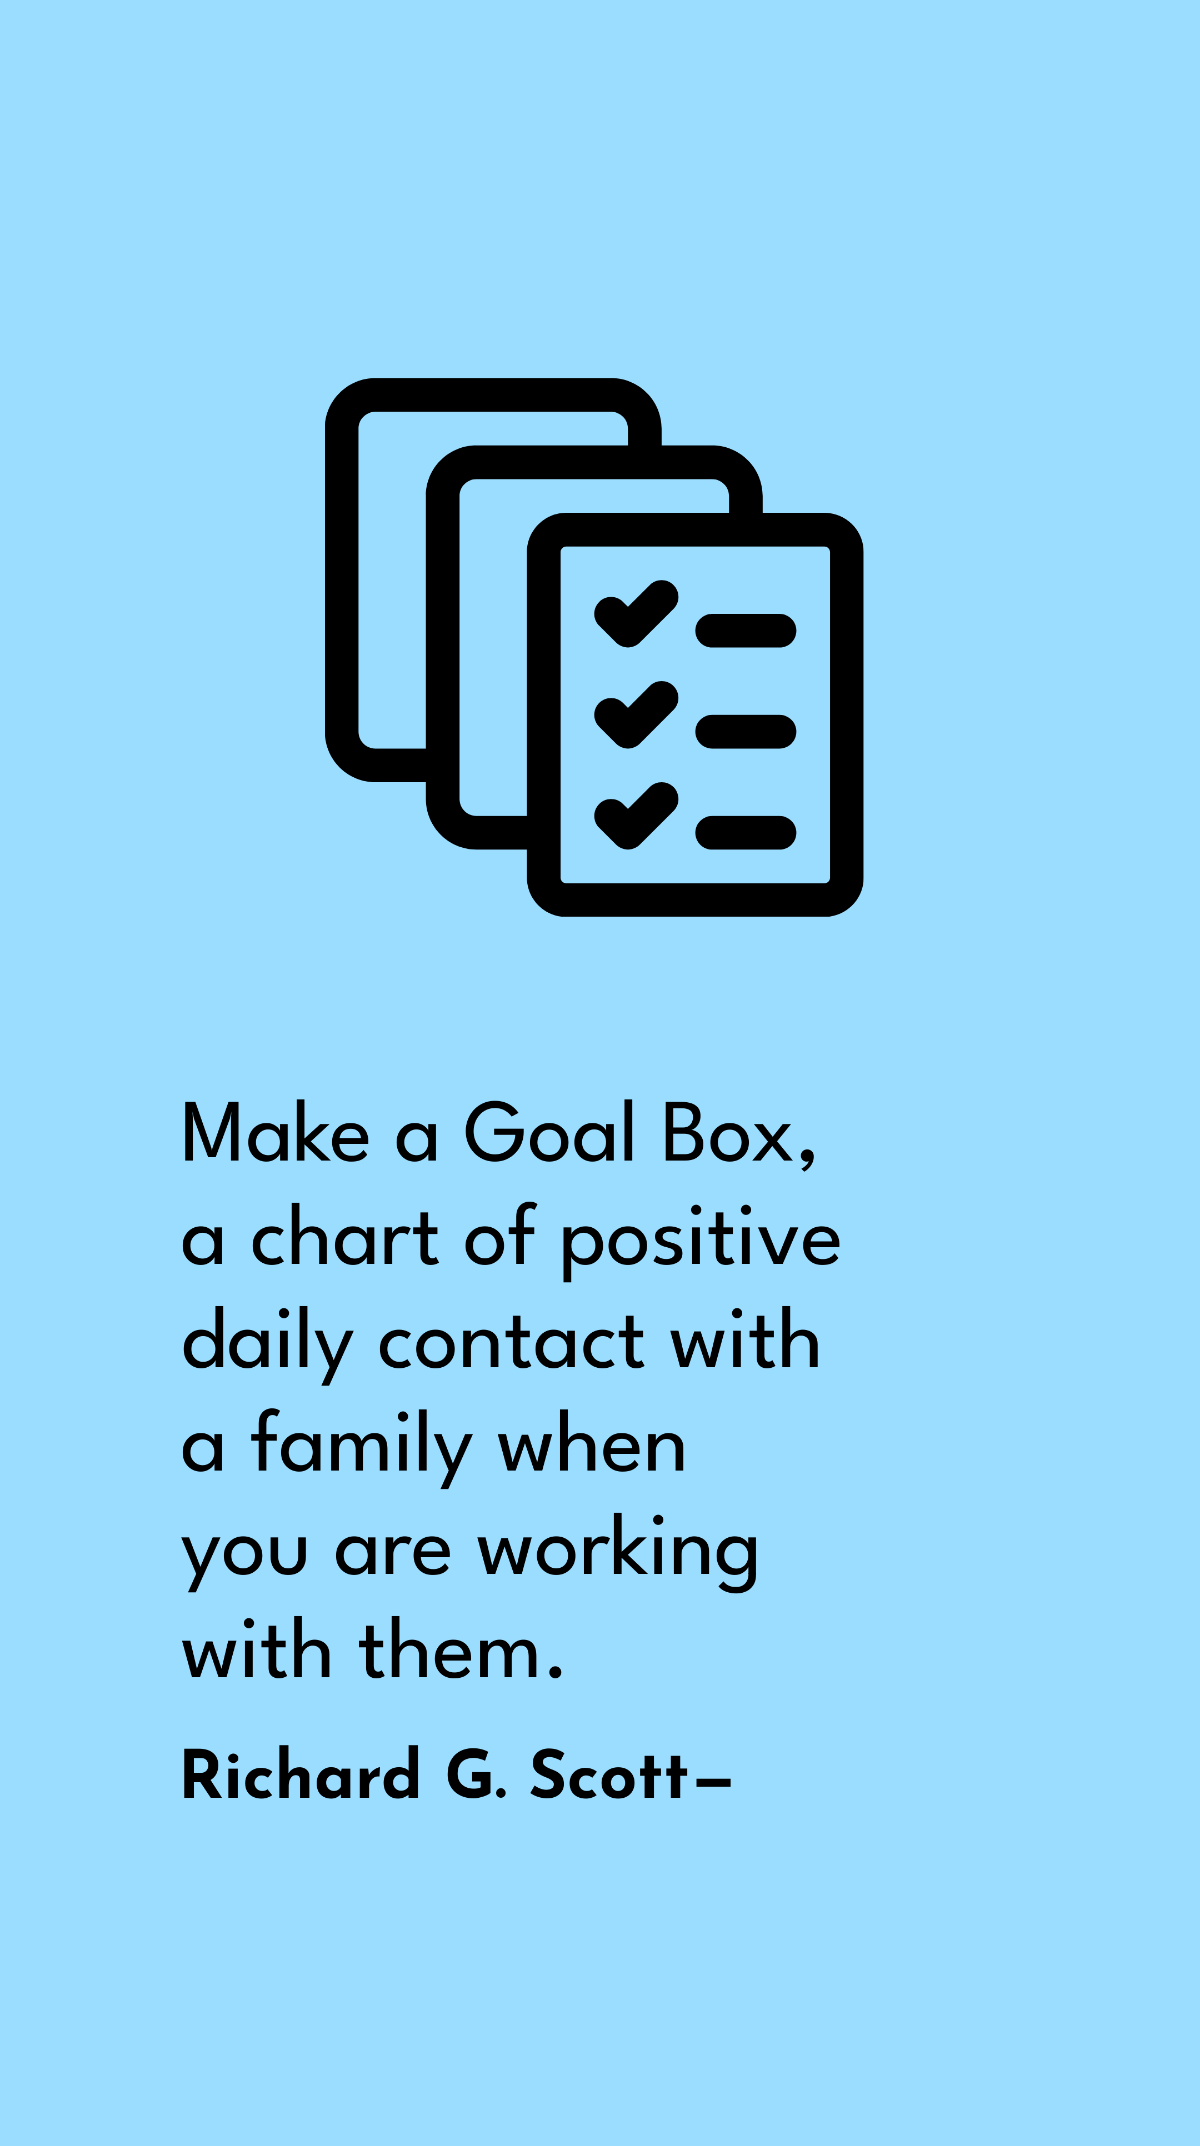 Richard G. Scott - Make a Goal Box, a chart of positive daily contact with a family when you are working with them.